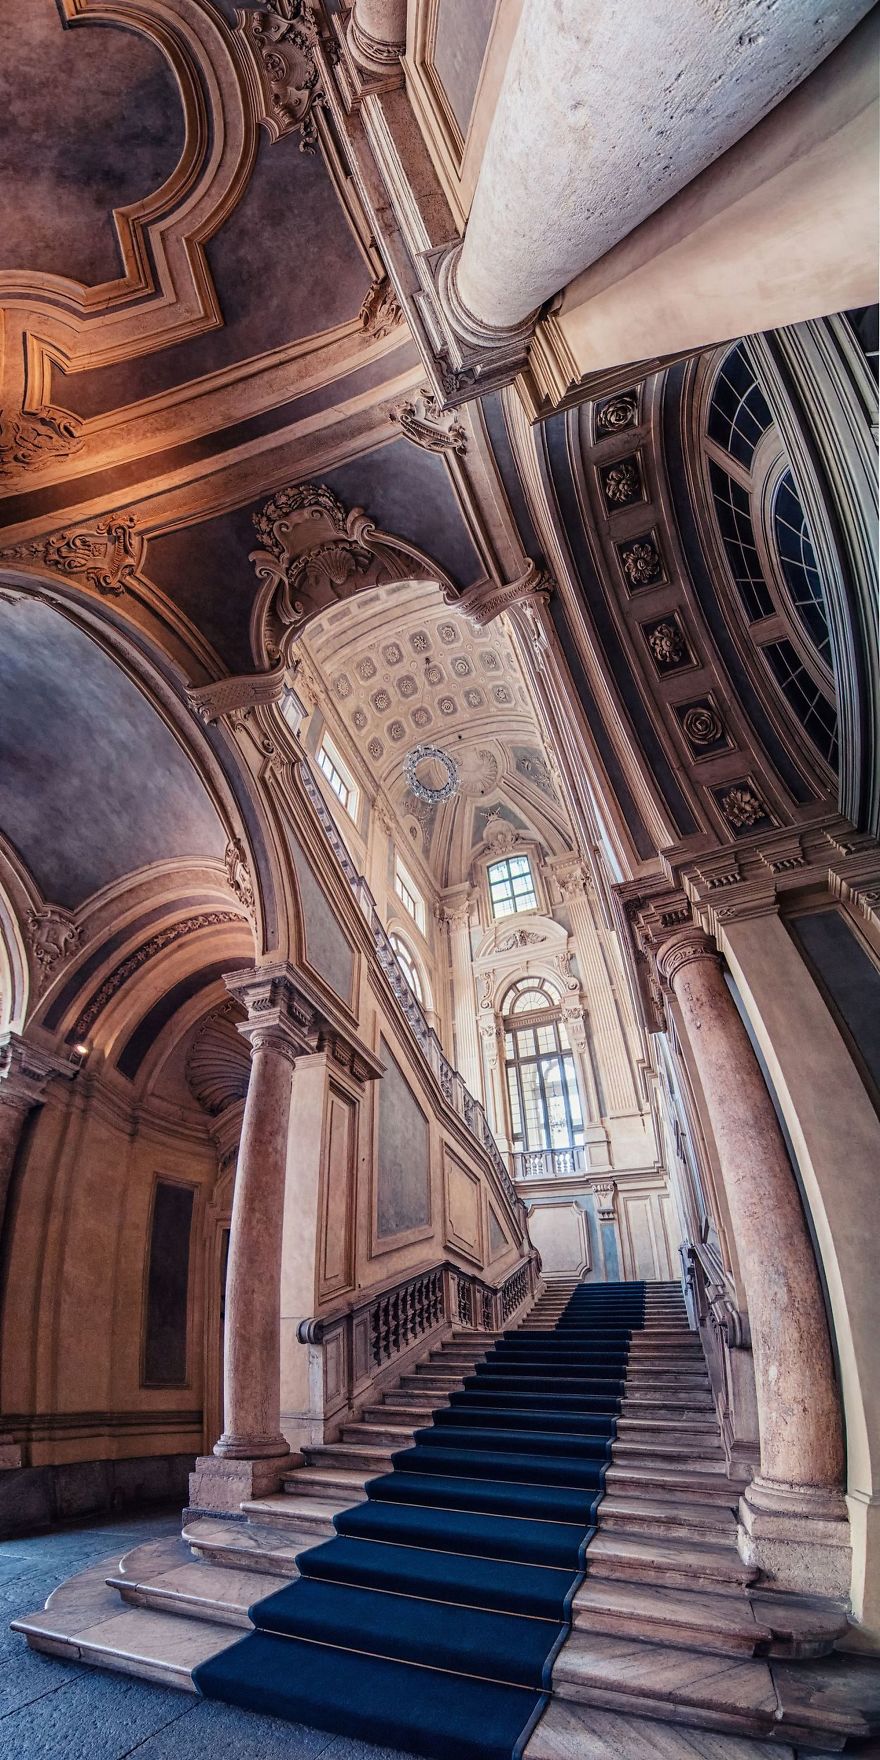 I Shoot Vertical Panorama To Search The Real Form Of Beautiful Architecture